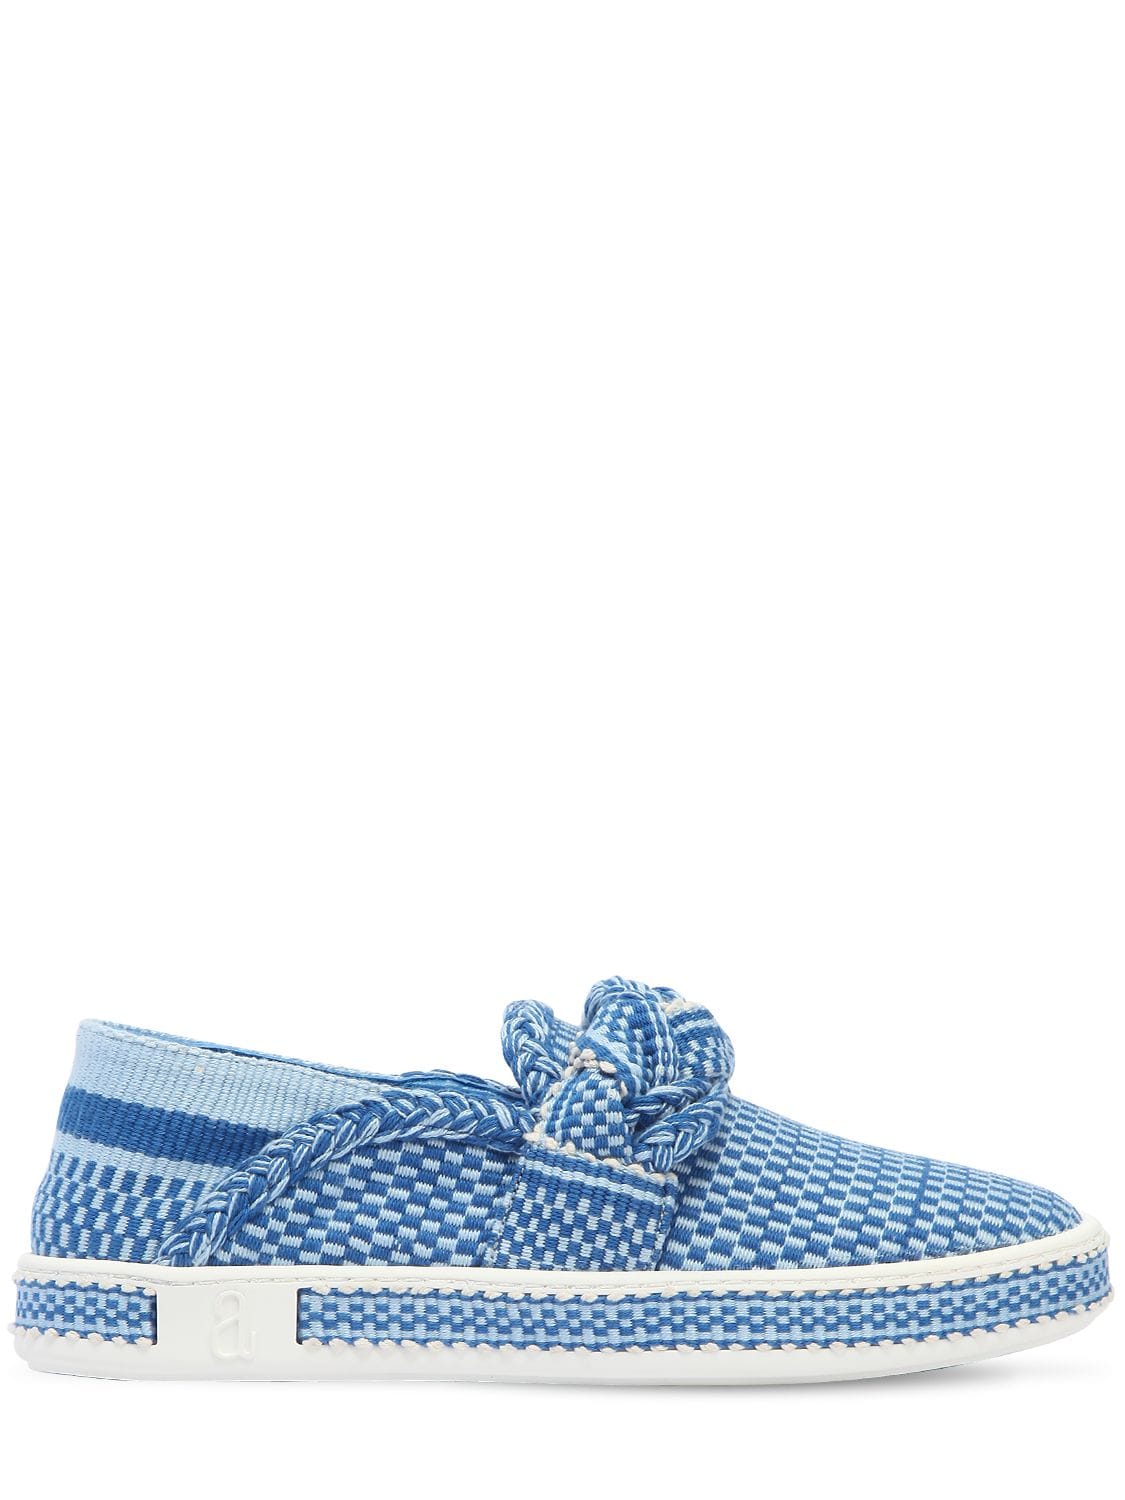 Antolina Paris 20mm Woven Cotton Slip-on Sneakers In Blue